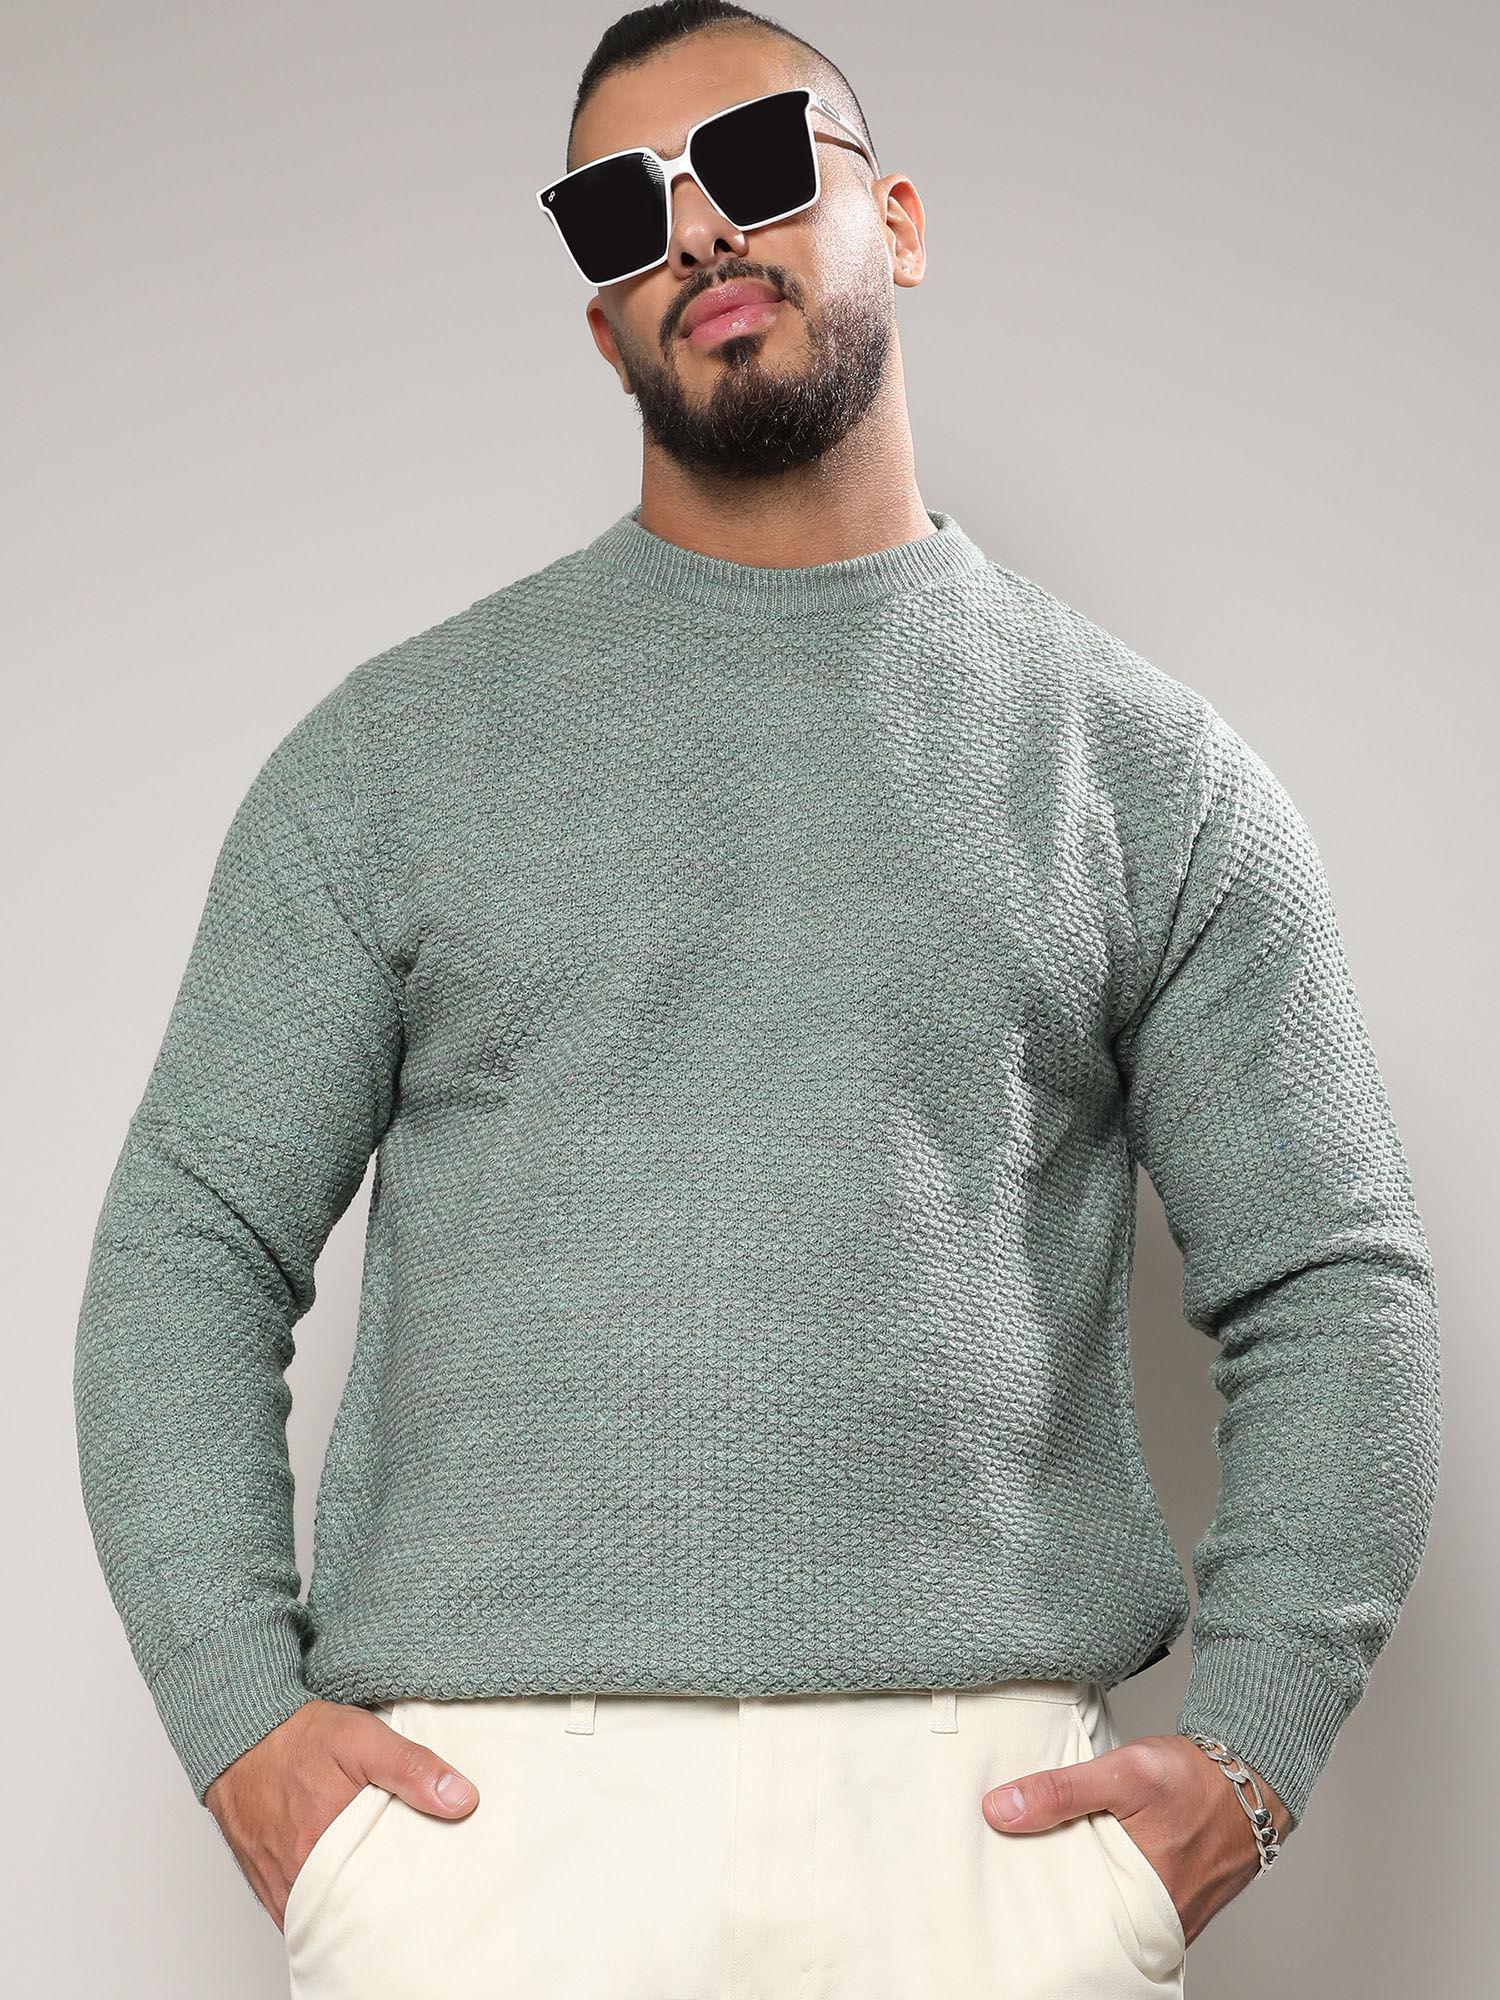 mens olive green textured knit pullover sweater